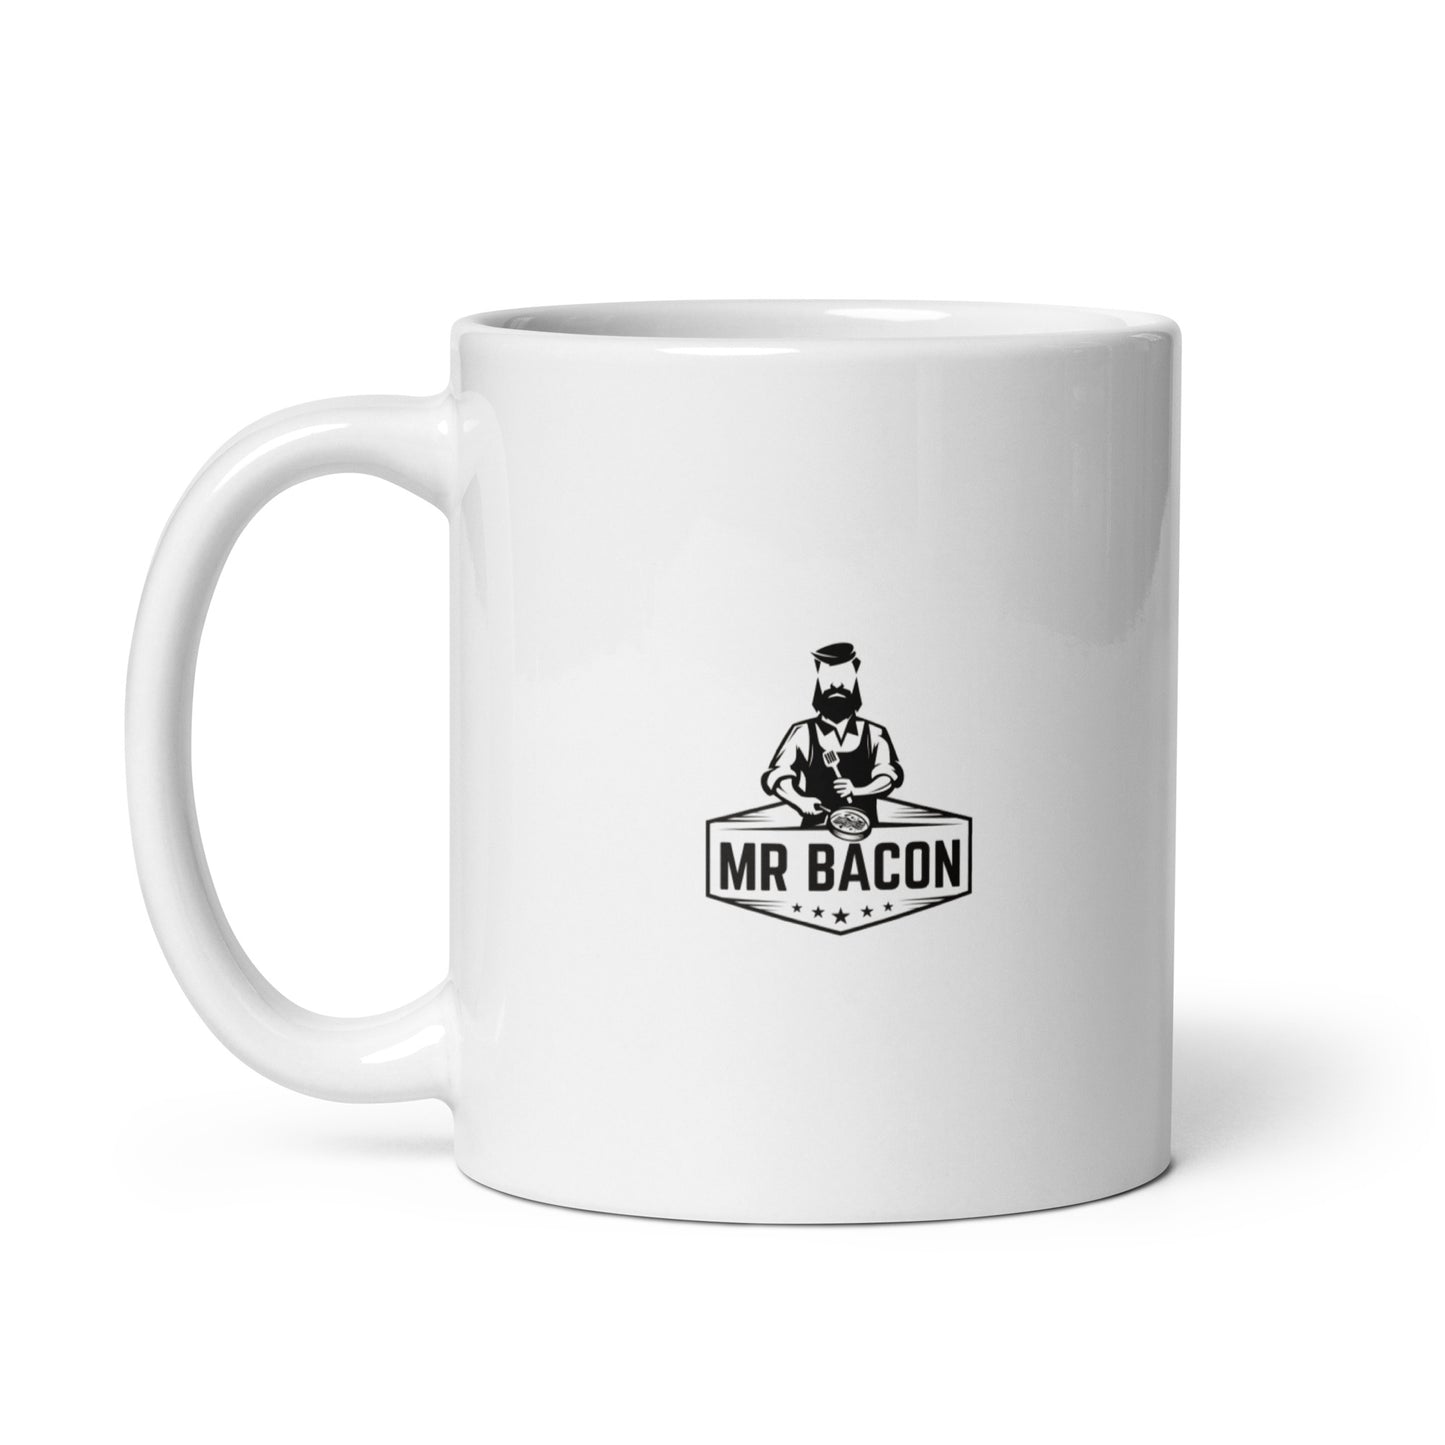 "Bacon is the Answer" - White glossy mug